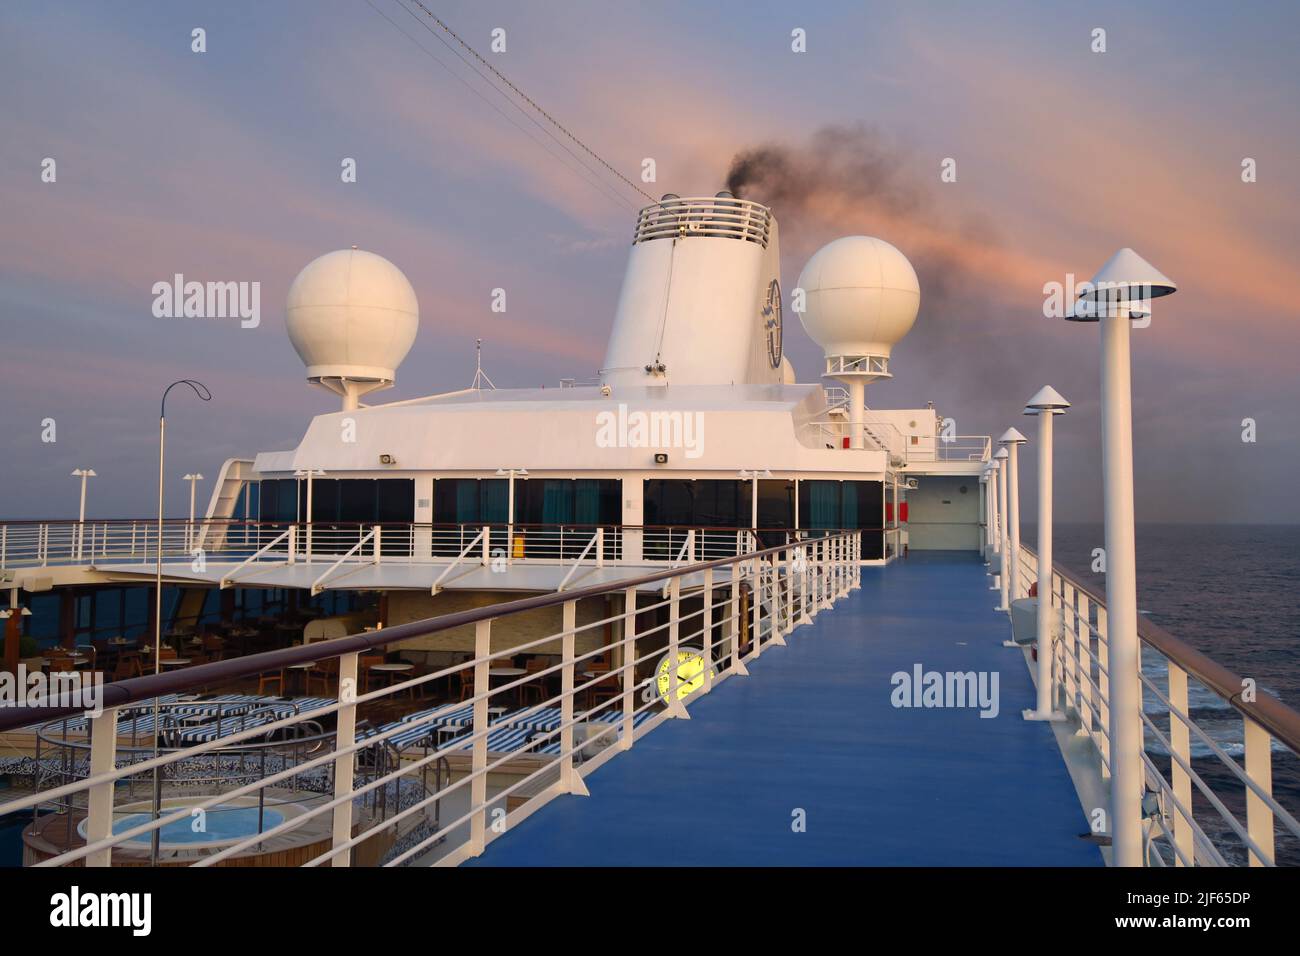 View of Oceania Cruises MS Sirena's top deck as it sails across the Bay of Biscay at sunset Stock Photo